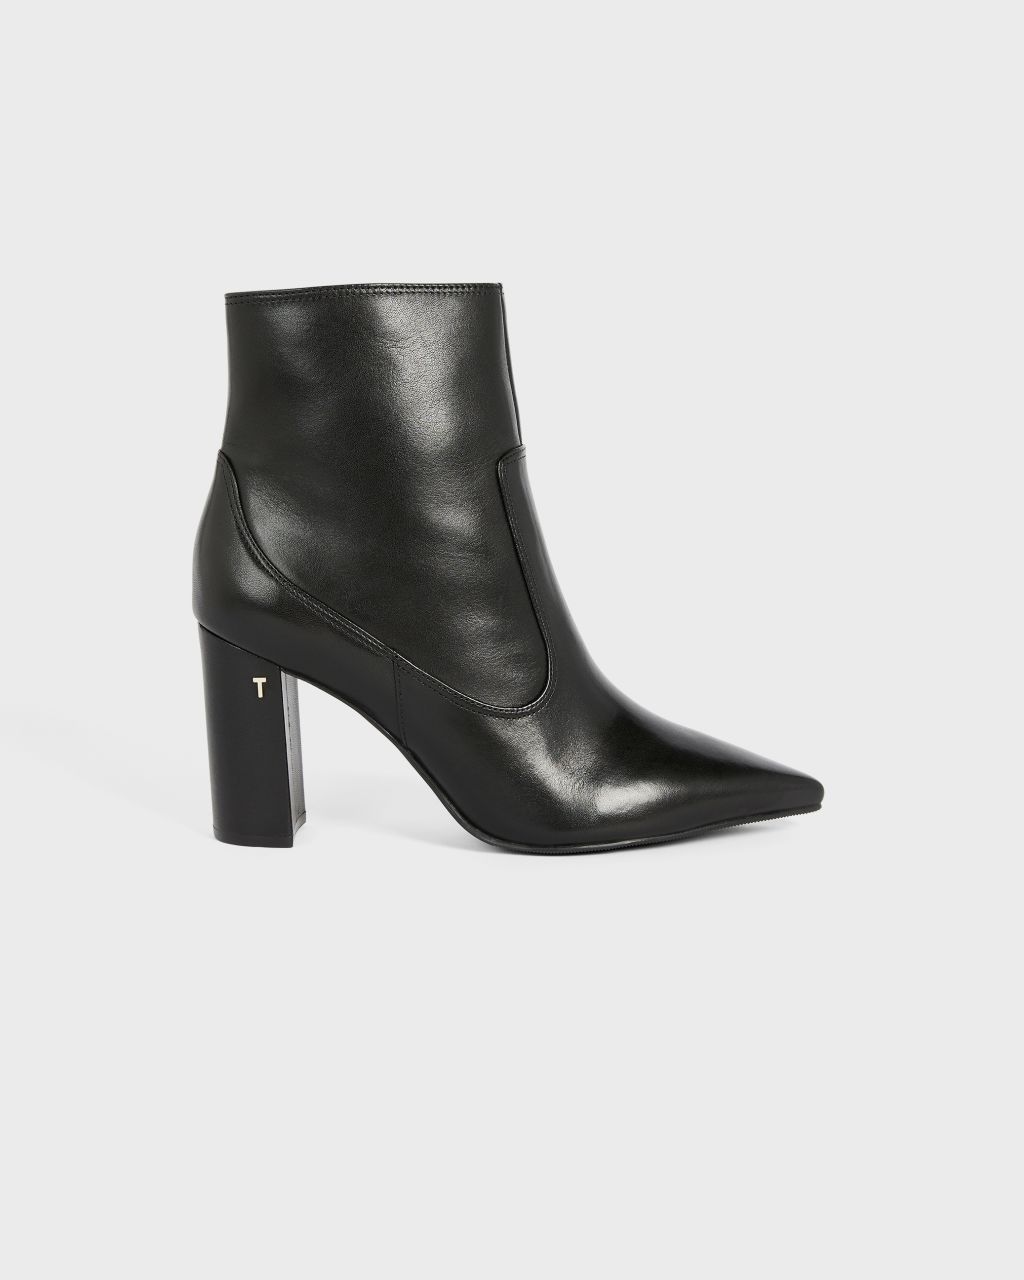 Ted Baker Women's Leather Block Heel Ankle Boot in Black, Nysha